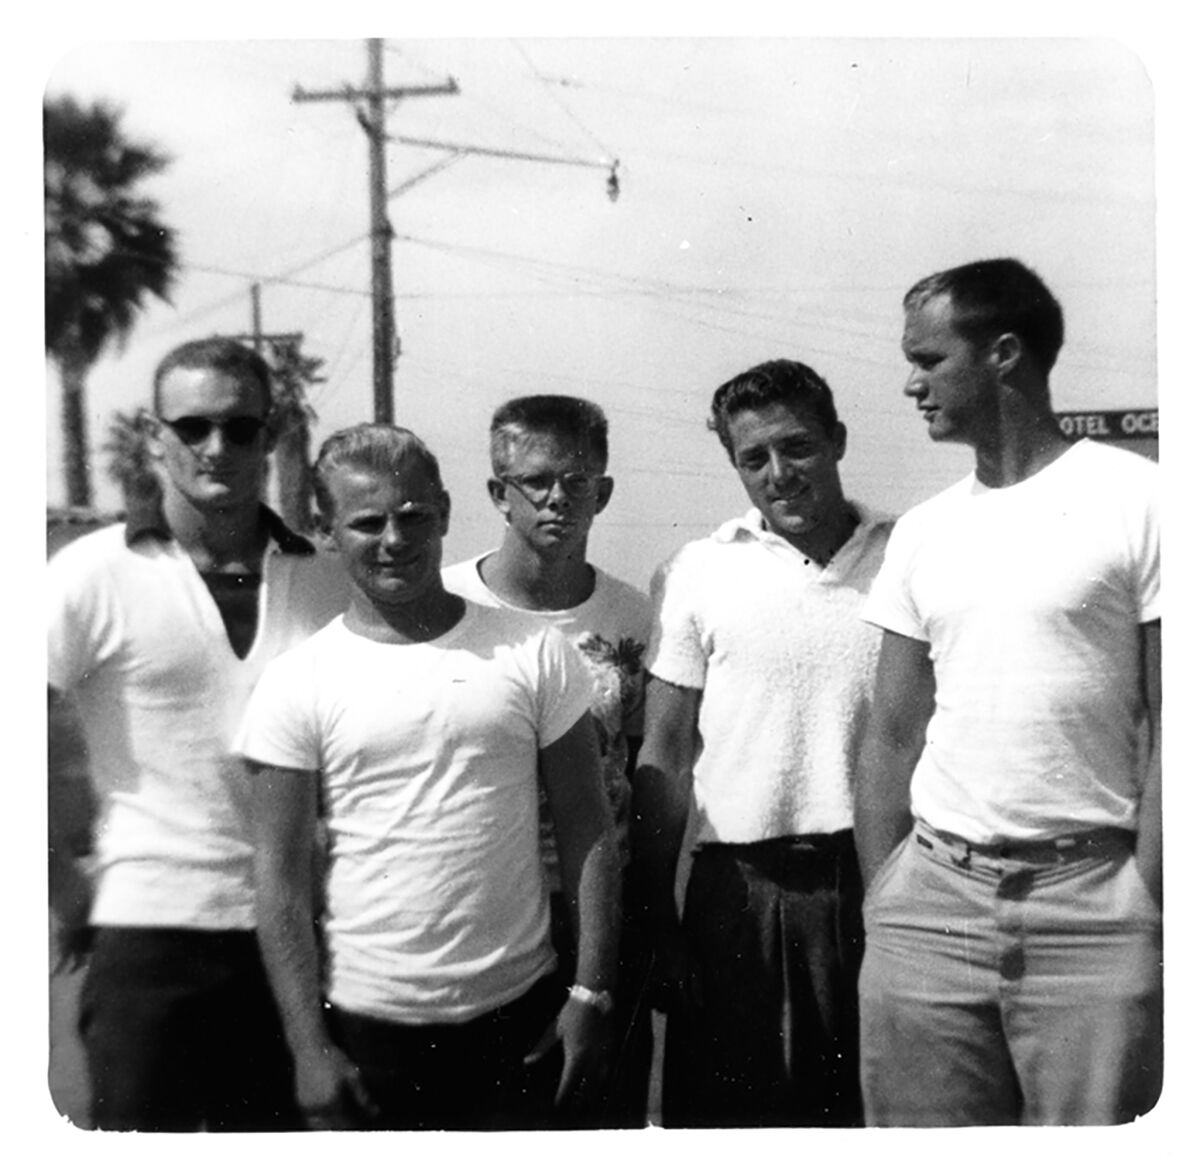 Jim Robb (second from left) is pictured with friends and local lifeguards in 1947.